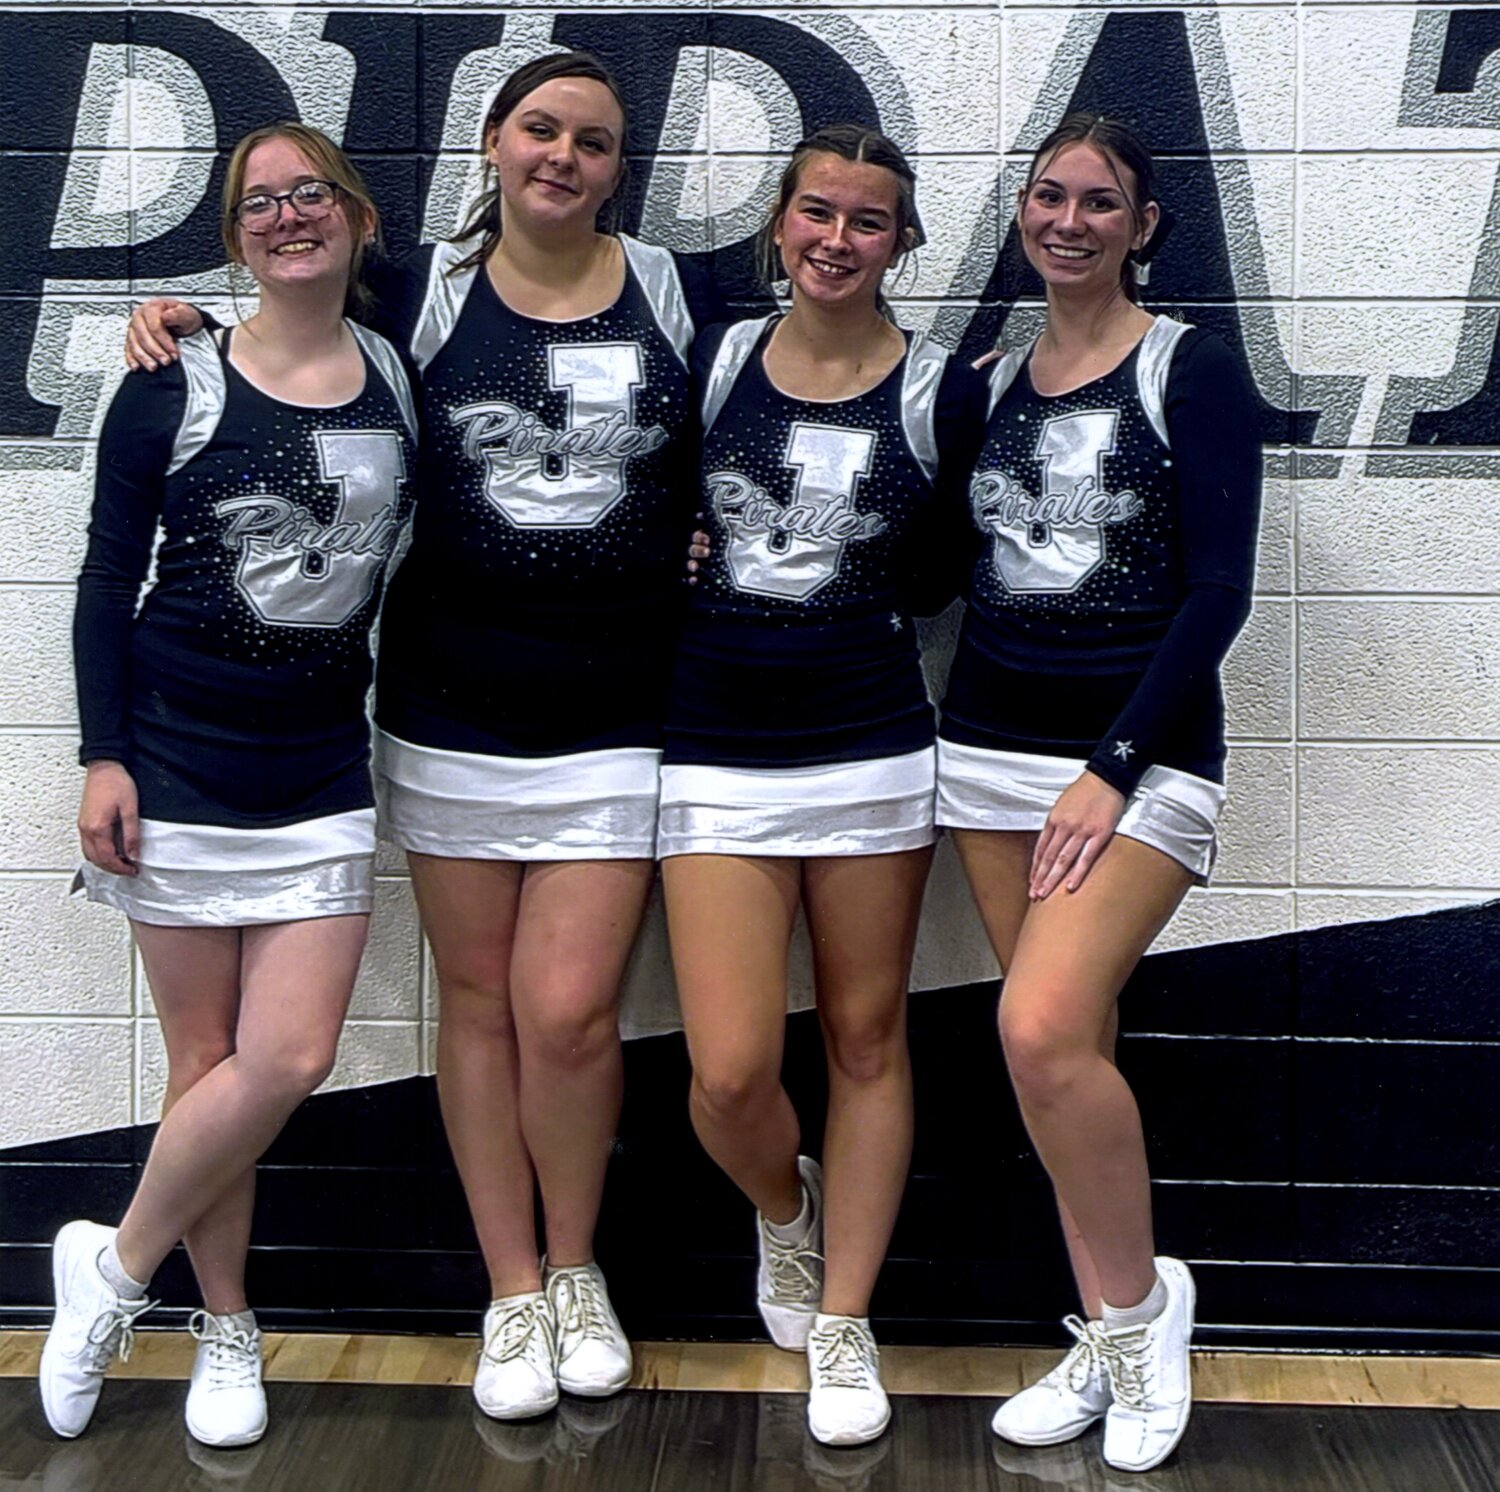 Jasper Cheerleading members, from left,  Bailey Kolb, Carly Moore, Jaylen Cone and Mariah Joiner, will perform with Varsity Spirit All Americans Dec. 4-9 during events observing the 82nd anniversary of the attack on Pearl Harbori in Honolulu, Hawaii. The events include a parade having the theme, "Remembering the Past and Celebrating Our Future." Veterans and their families will be honored while recognizing that once bitter enemies can become loyal friends and allies. The girls were selected as Varsity Spirit All-Americans during the University of Central Arkansas Camp held at Jasper High School over the summer. "We are thrilled these excellent athletes will have the chance to perform and experience our Special Events in Honolulu," said Bill Seely, president of Varsity Spirit.